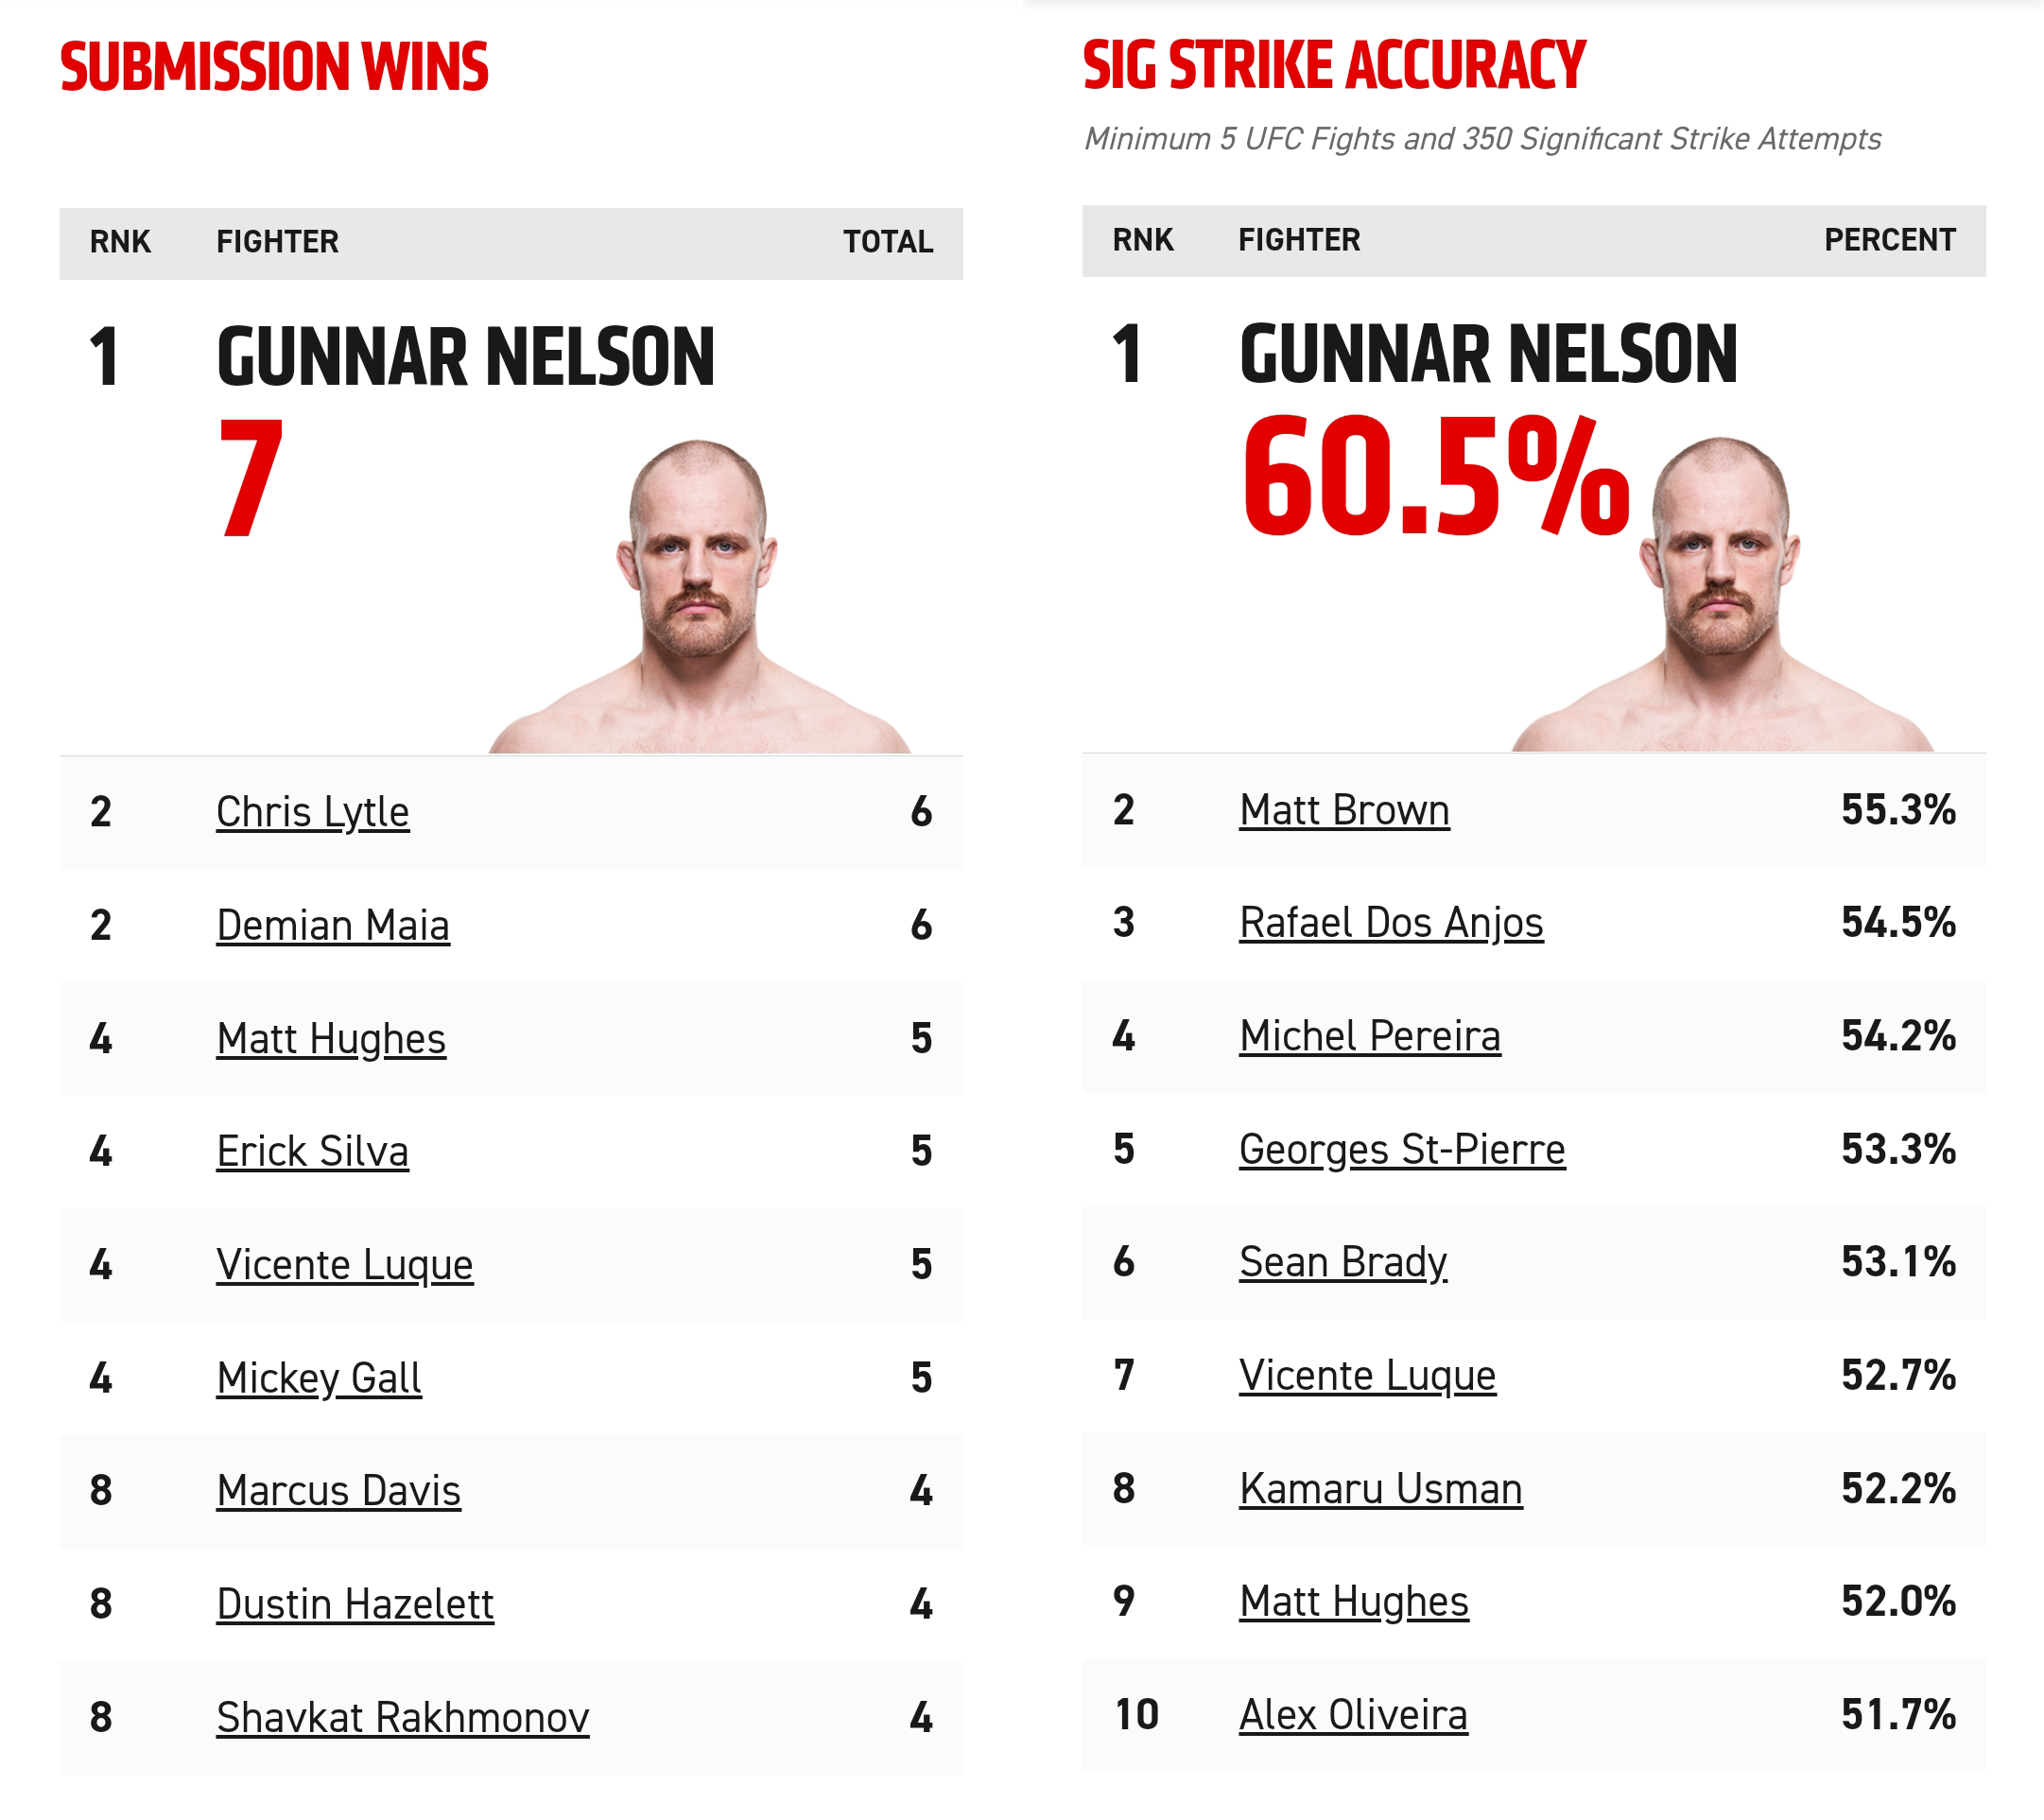 UFC record for most Submissions Wins and Significant Strike Accuracy